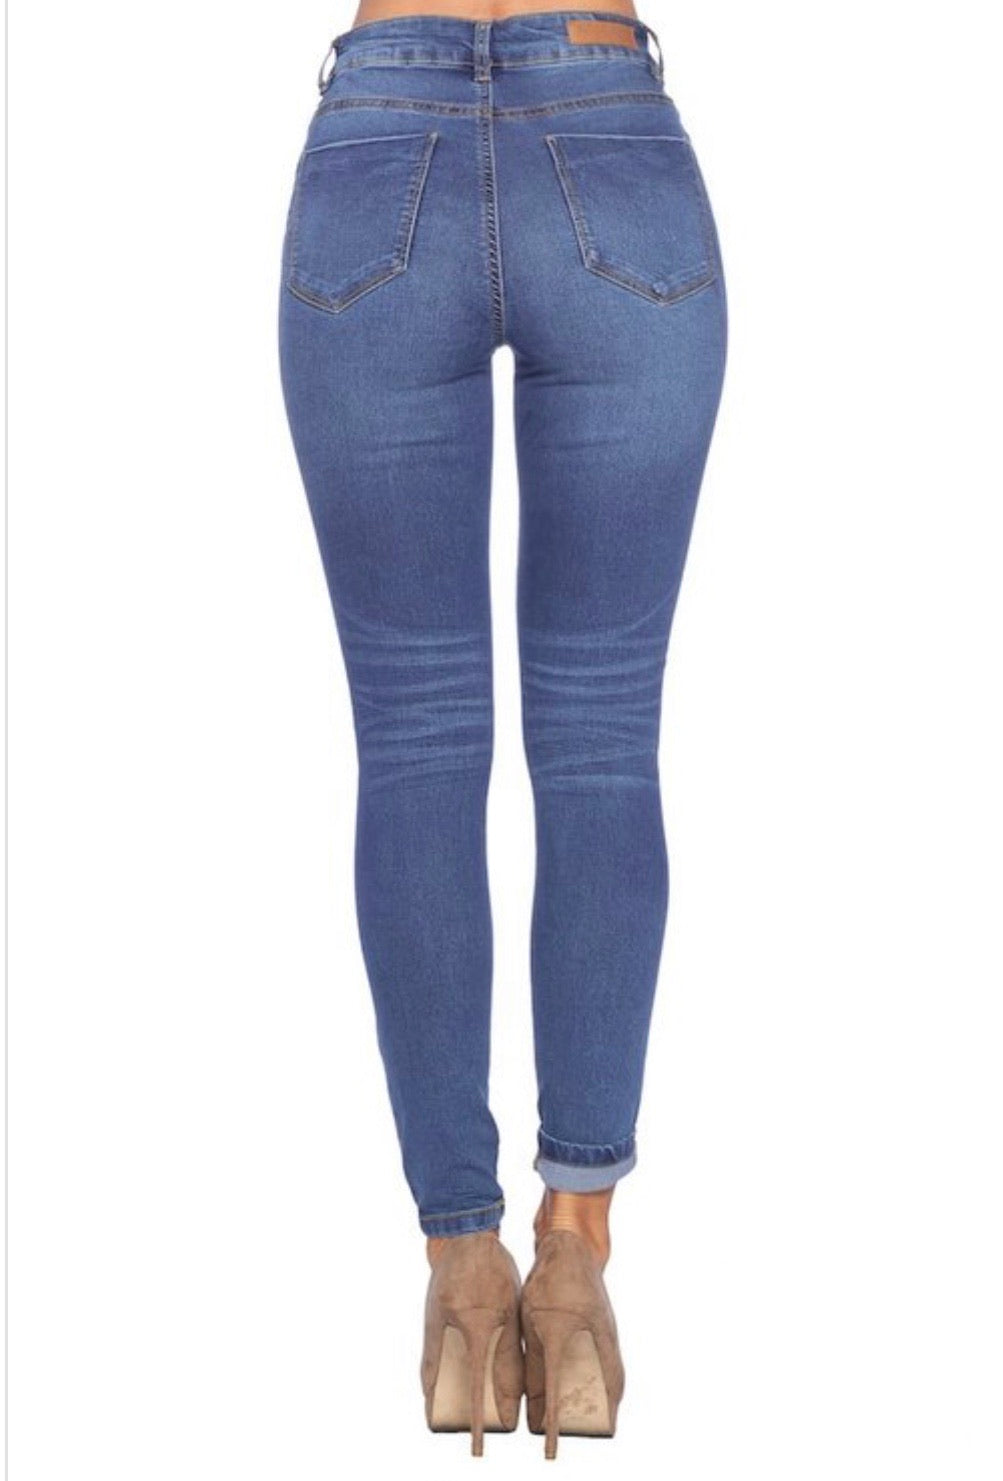 Madelyn High Rise Medium Wash Stretch Jeans - Corinne Boutique Family Owned and Operated USA